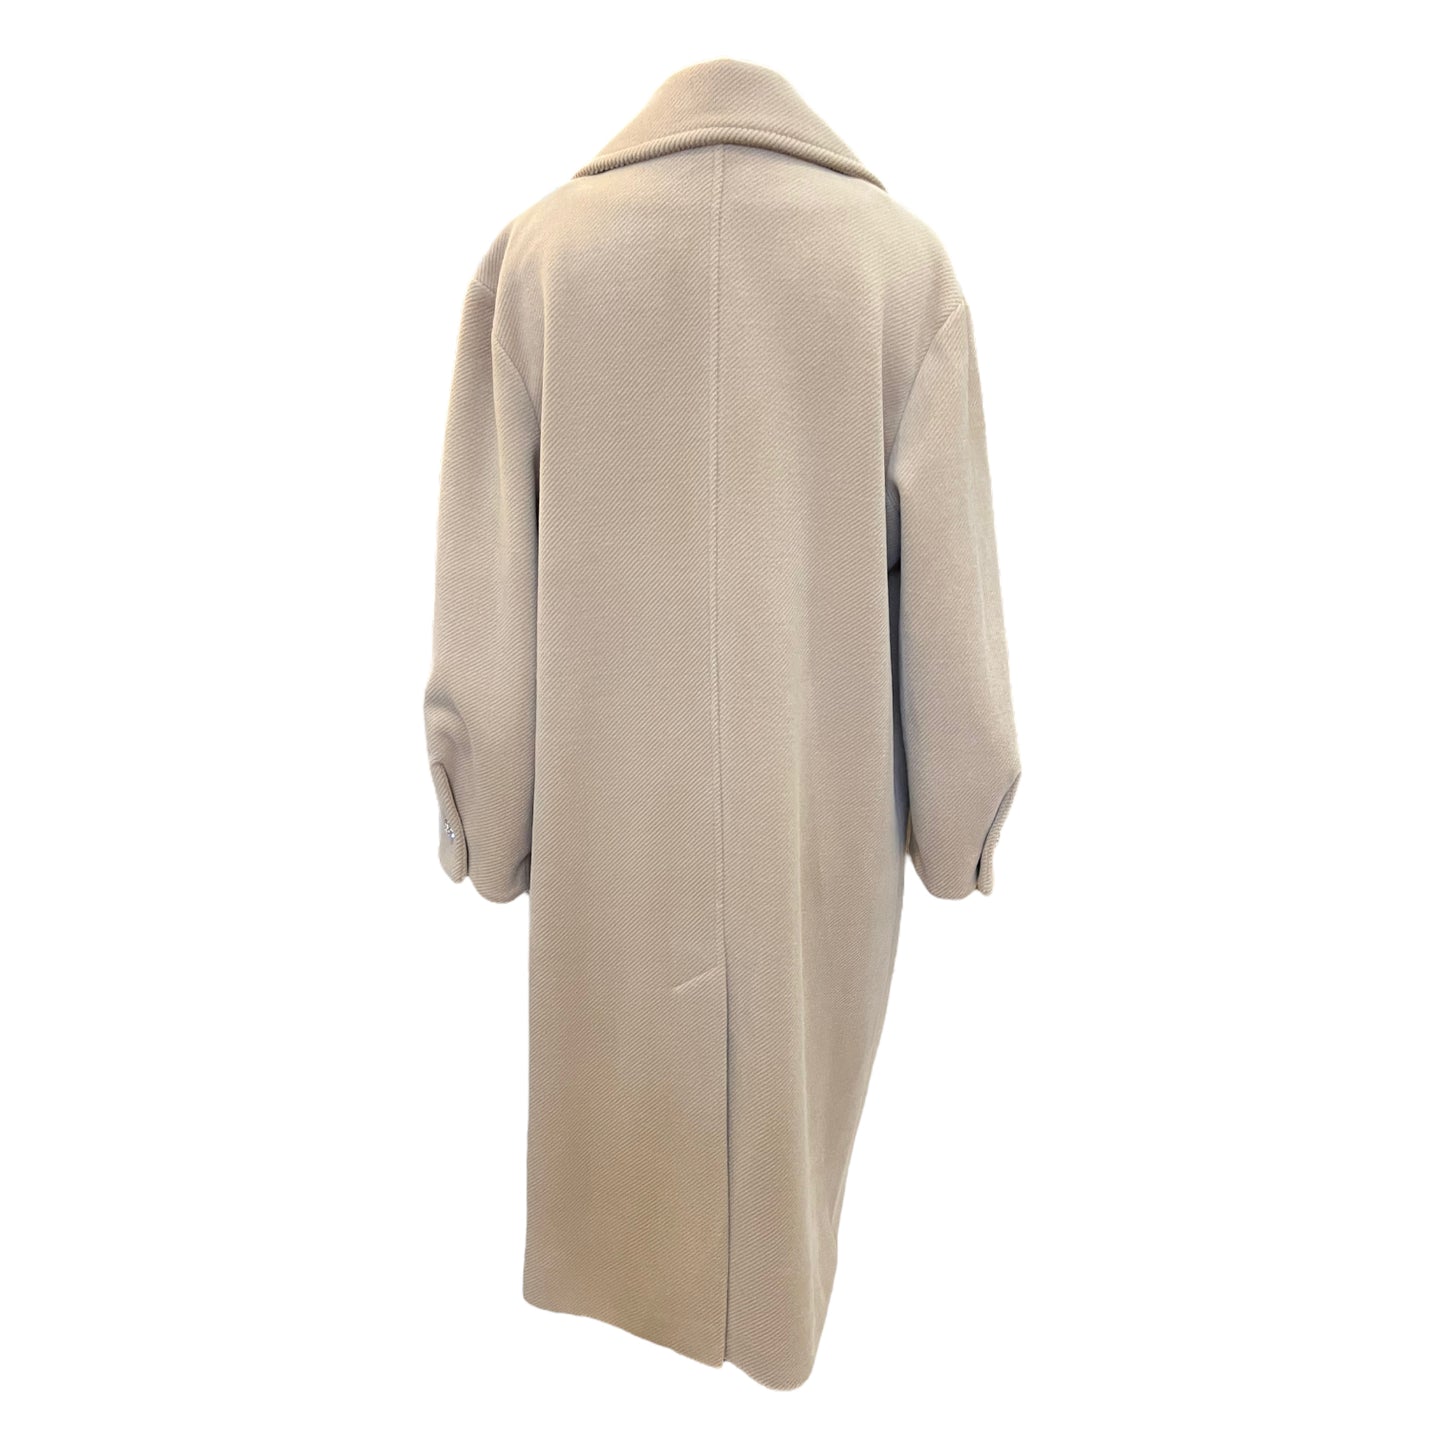 NEW Access Camel Coat with Accent Buttons